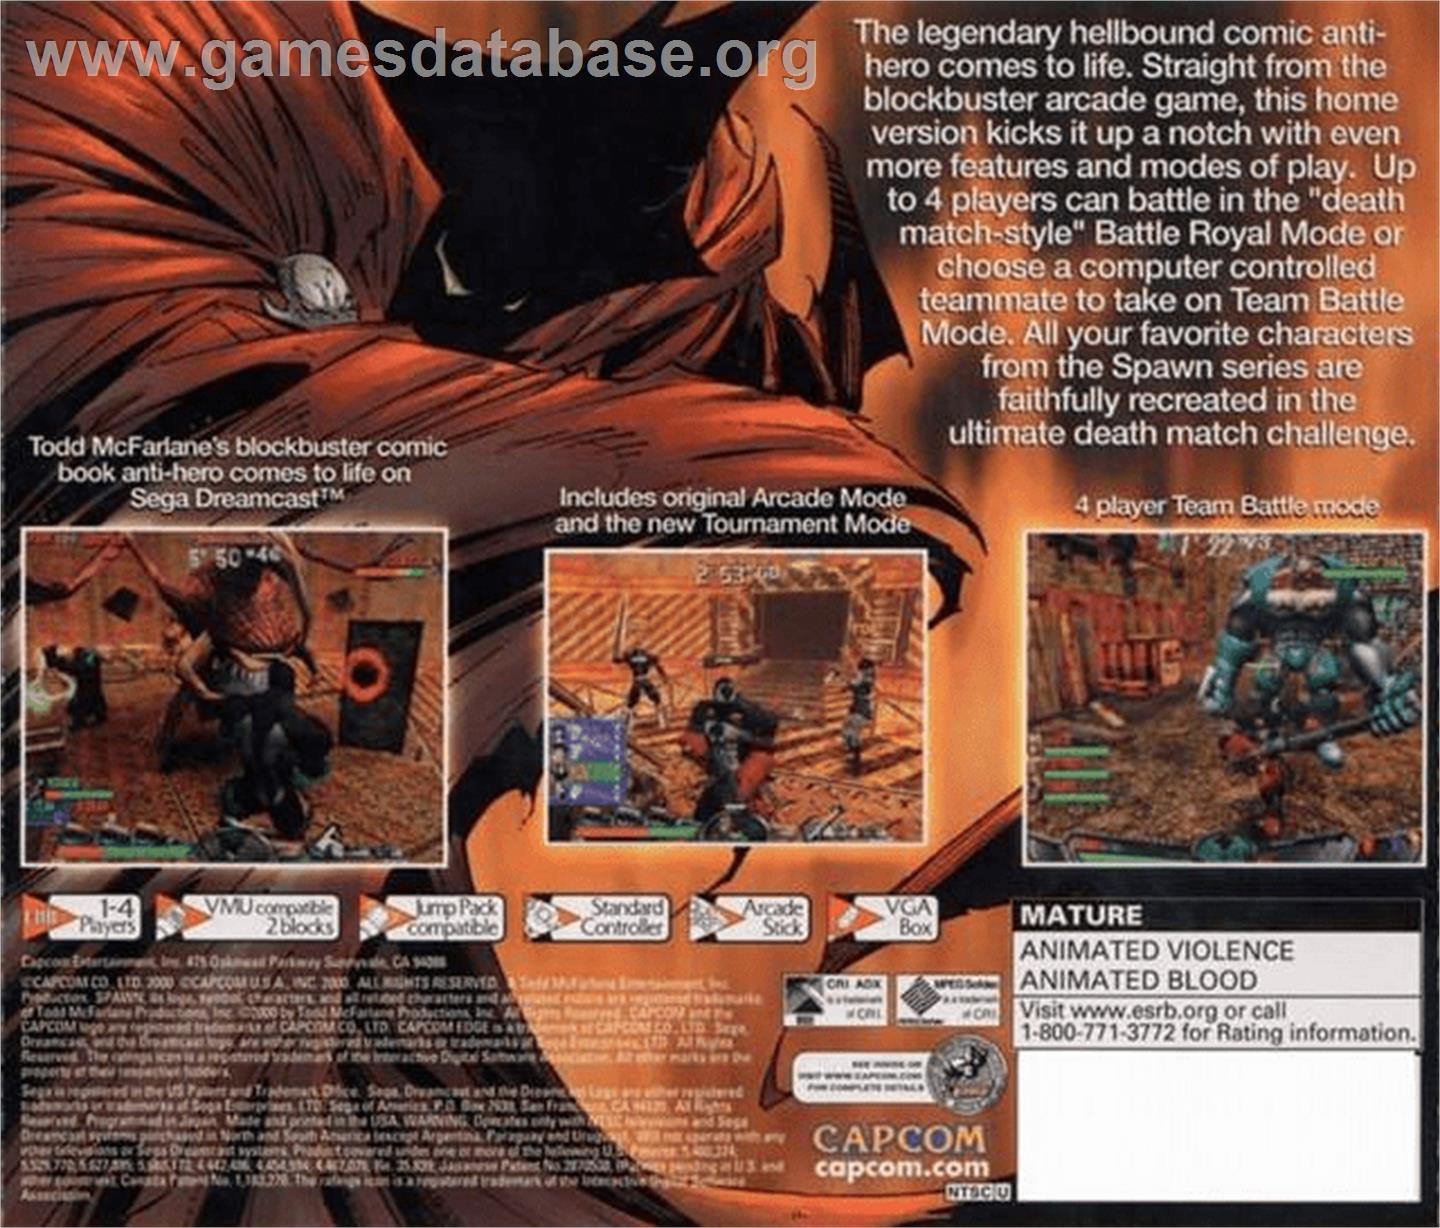 [Análise Retro Game] - Spawn In The Demon's Hand - Dreamcast Spawn-_In_the_Demon-s_Hand_-_2000_-_Capcom_Co.,_Ltd.